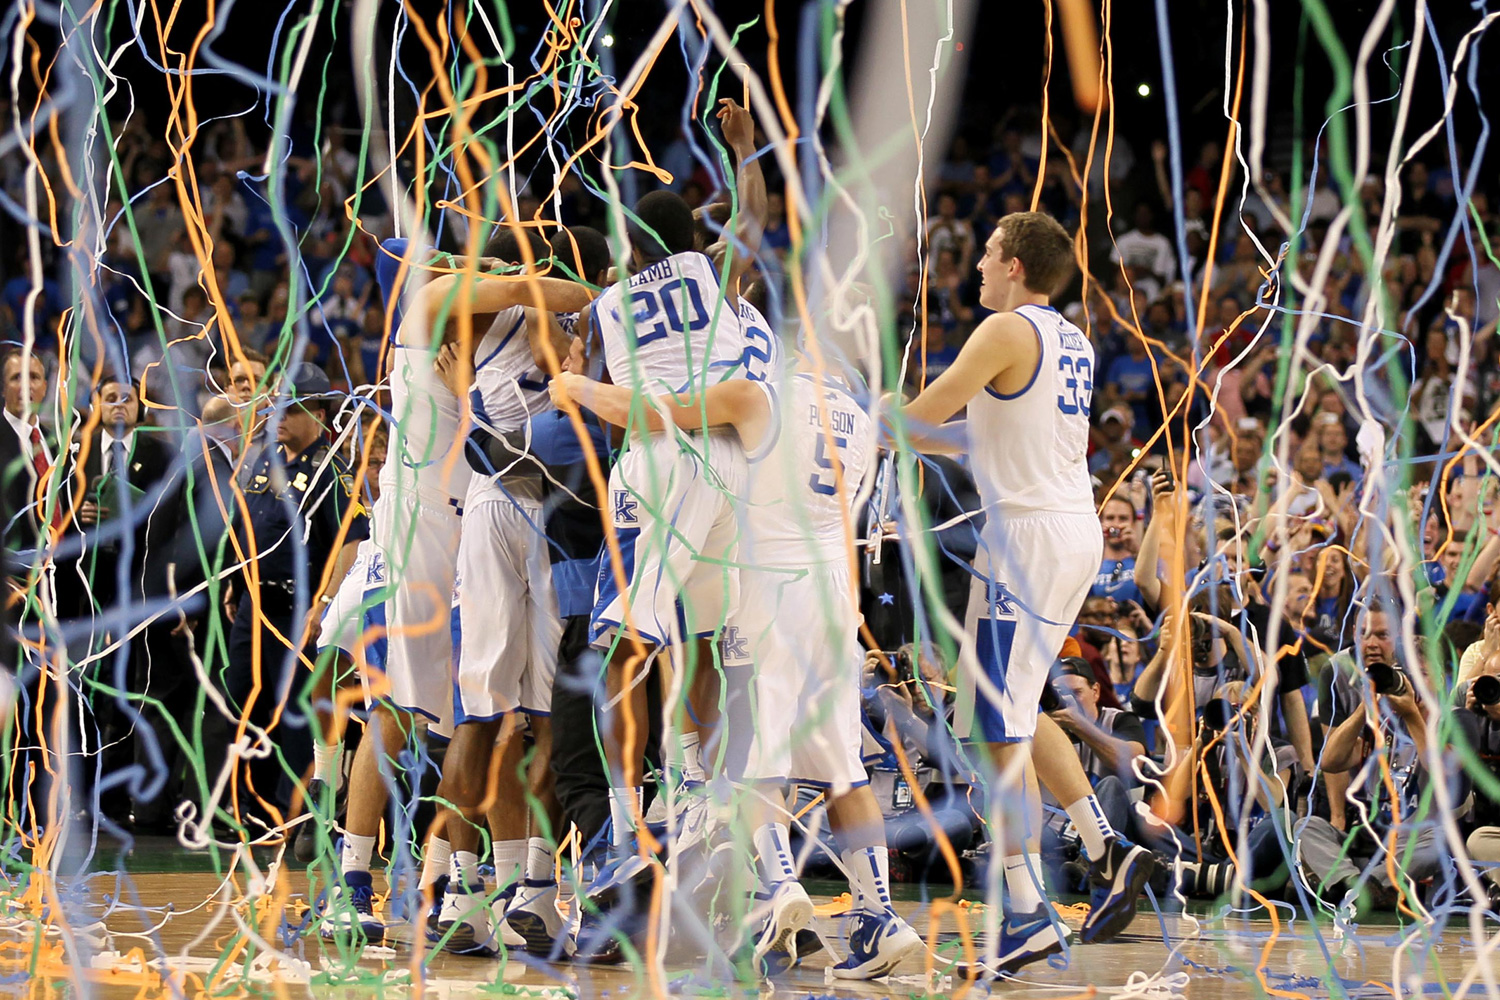 April 2, 2012. Kentucky players celebrate their victory over Kansas in the NCAA Final Four Championship game at the Superdome, in New Orleans.